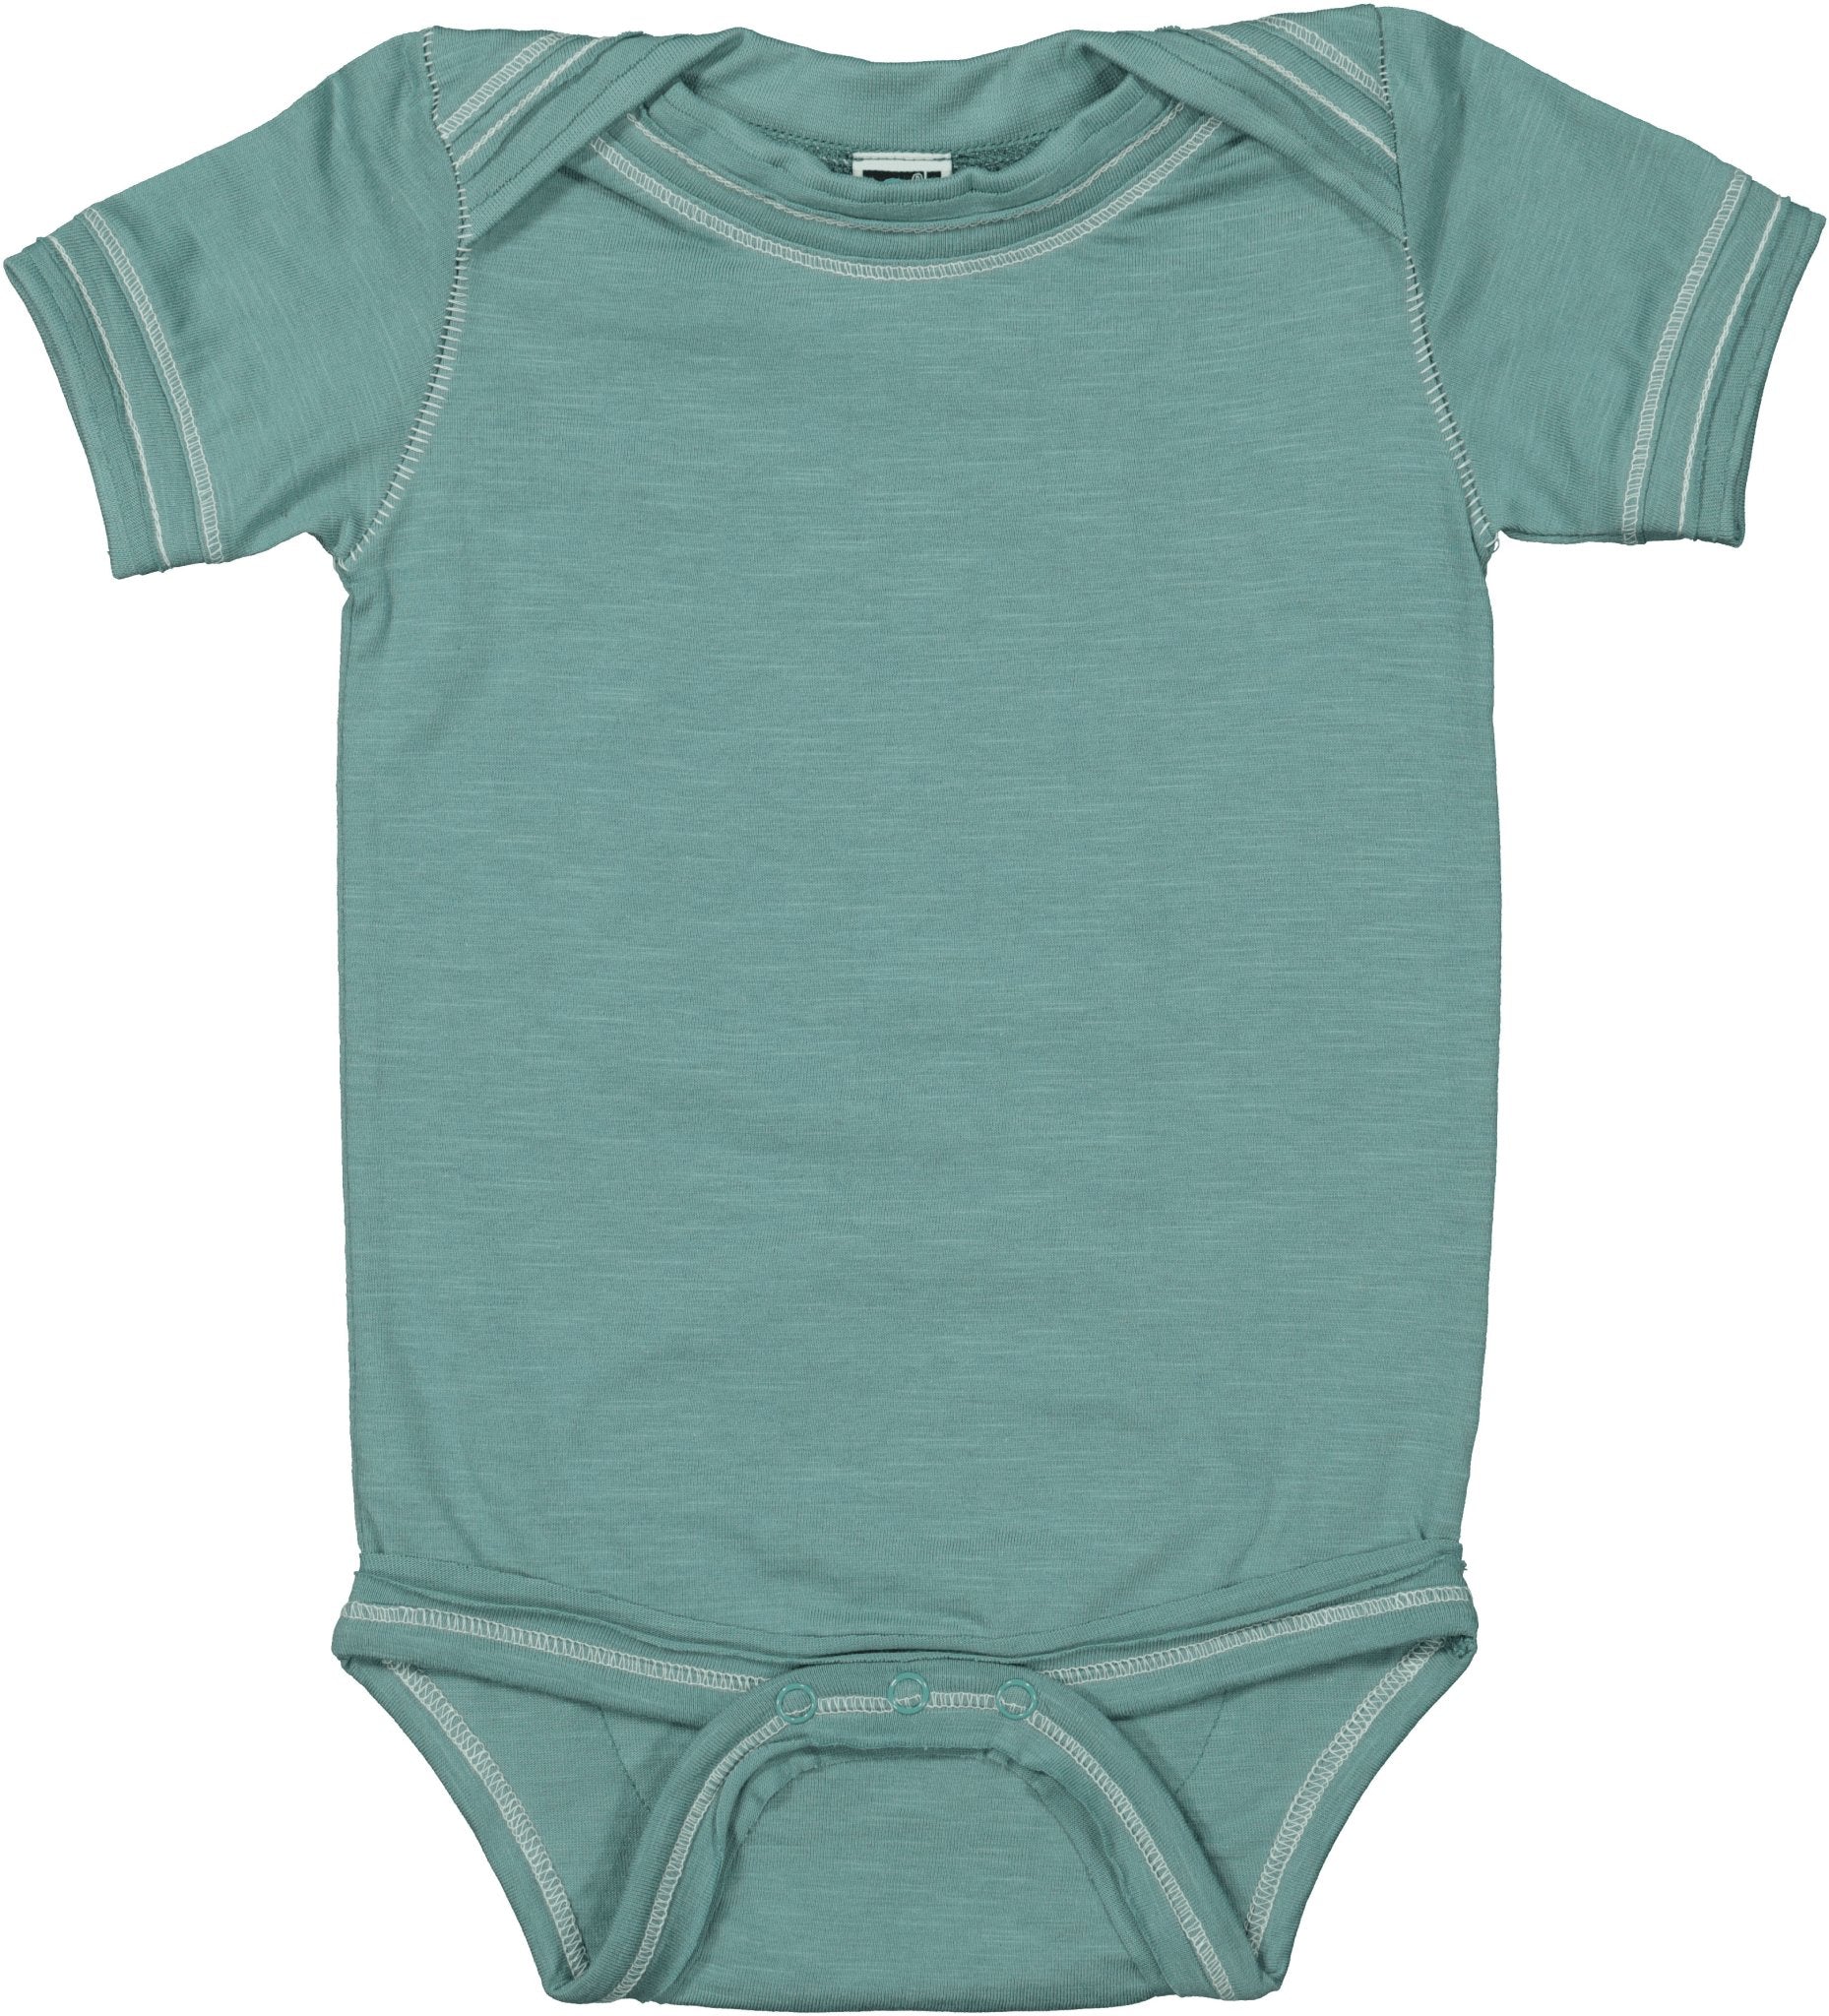 The Fair Trade Baby Short Sleeve Diaper Shirtcategory_Toddlers from The Good Tee - SHOPELEOS